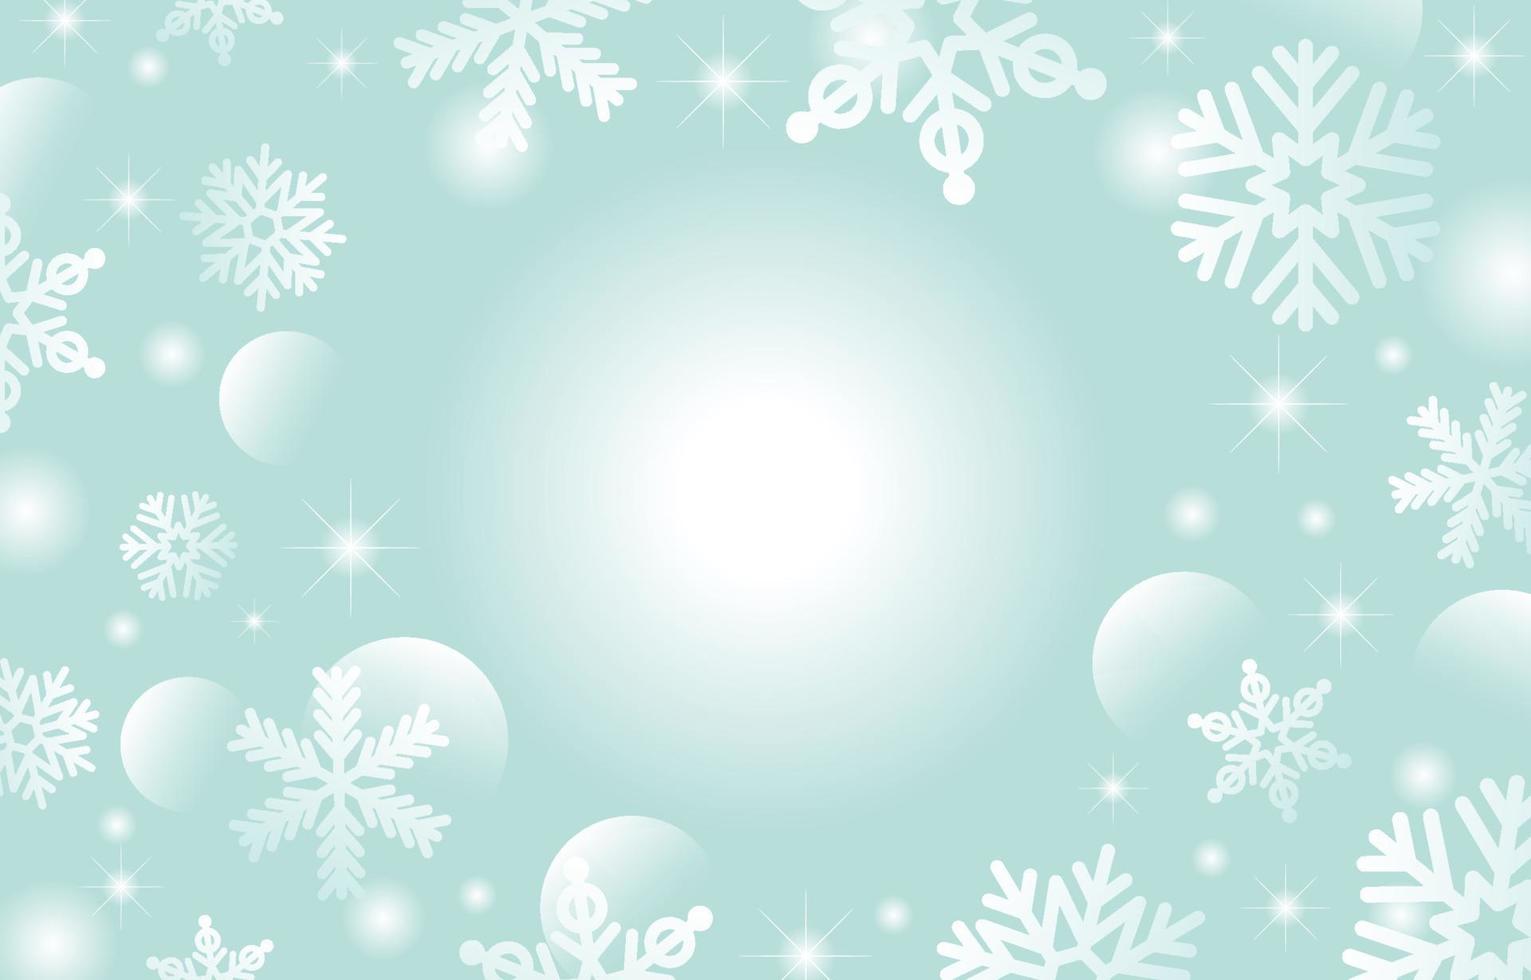 Snow with Ice Crystals Background vector